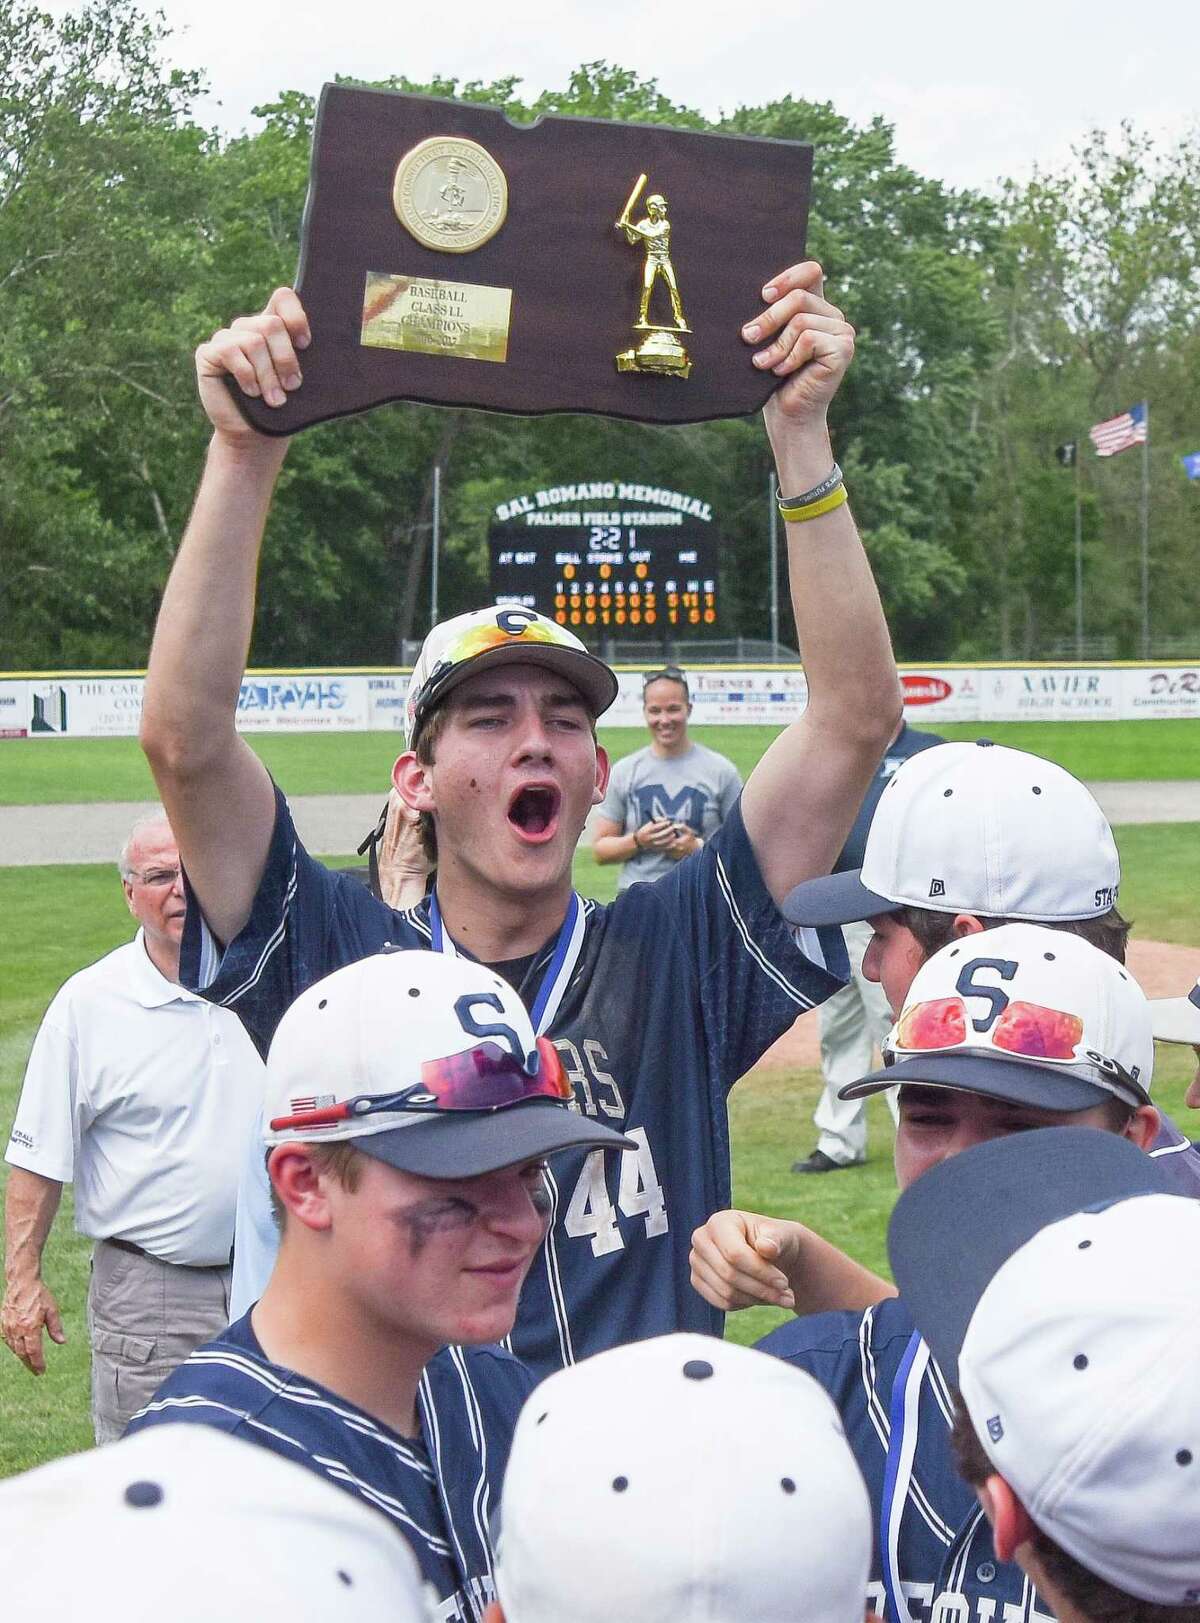 The Staples Wreckers won the 2017 Class LL baseball championship on Saturday, June 10, 2017, with a 5-1 win over Amity Regional High School at Palmer Field in Middletown. Photo John Nash